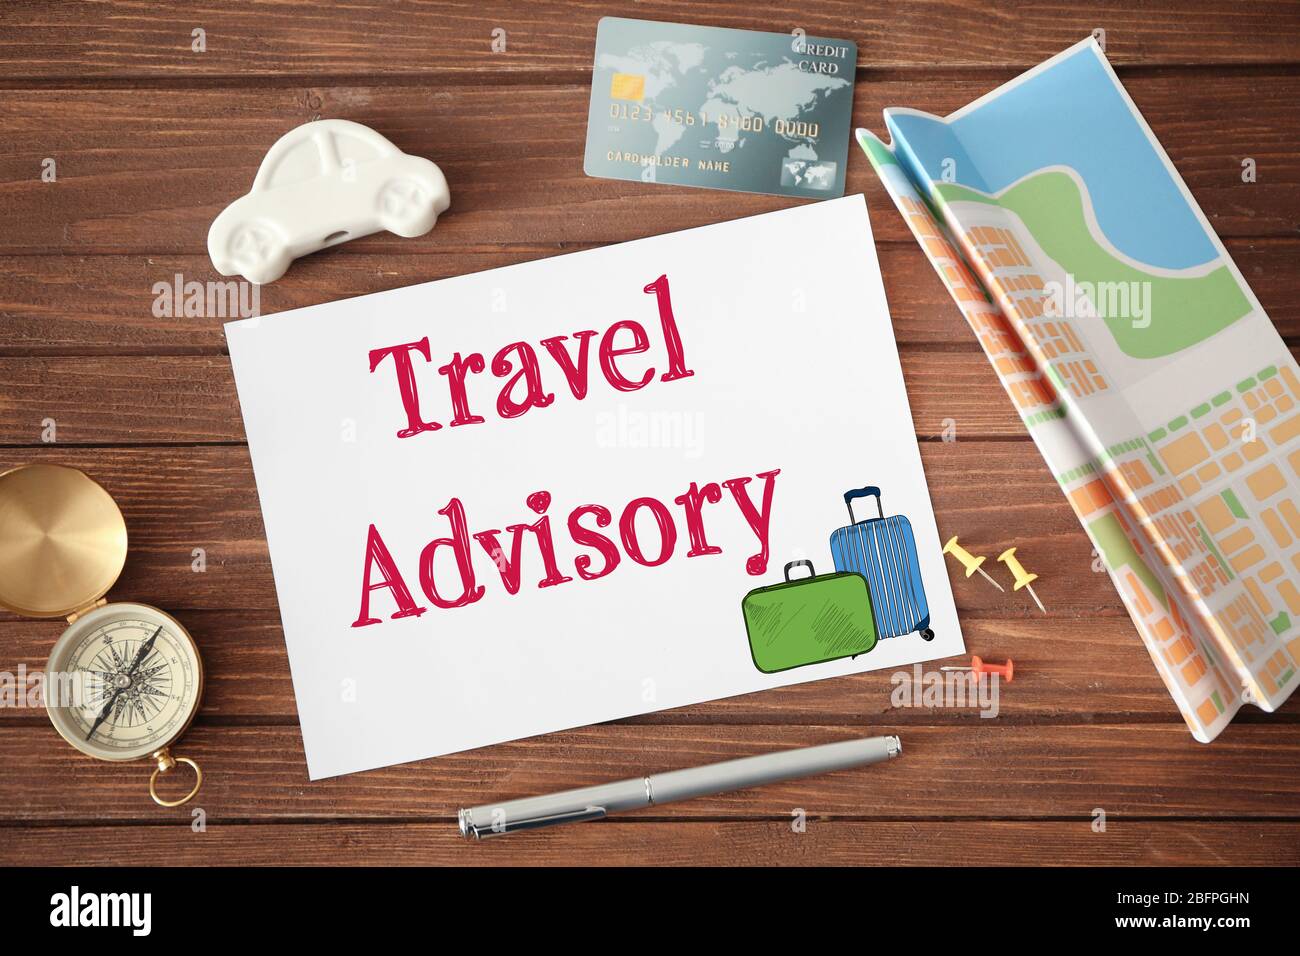 Concept of tourism. Paper with text TRAVEL ADVISORY and credit card on wooden background Stock Photo